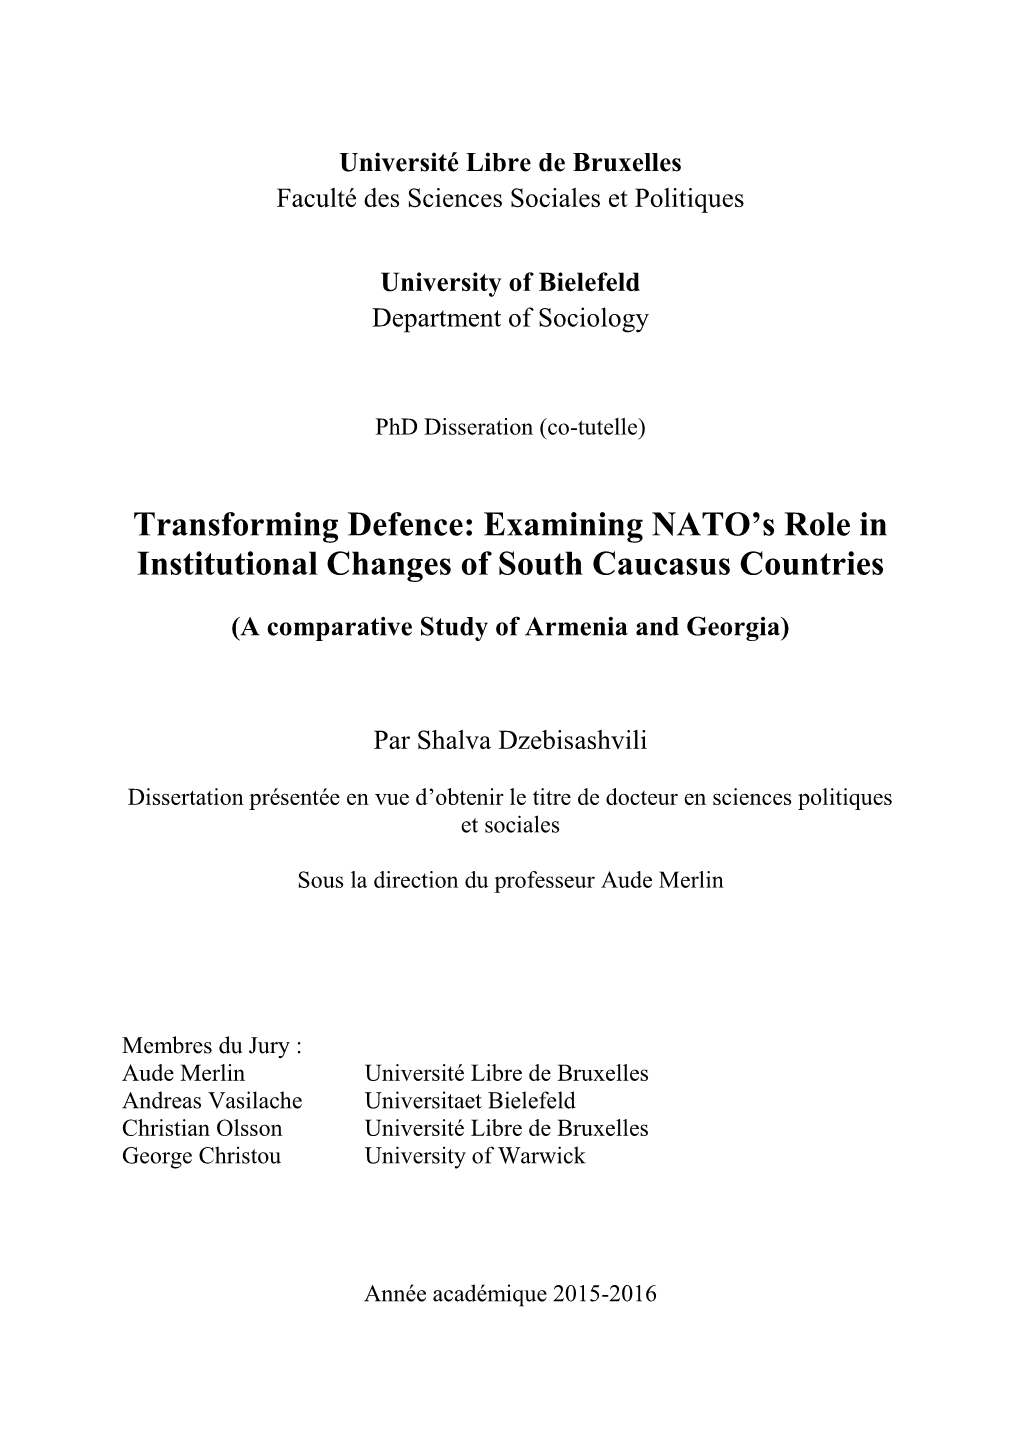 Examining NATO's Role in Institutional Changes of South Caucasus